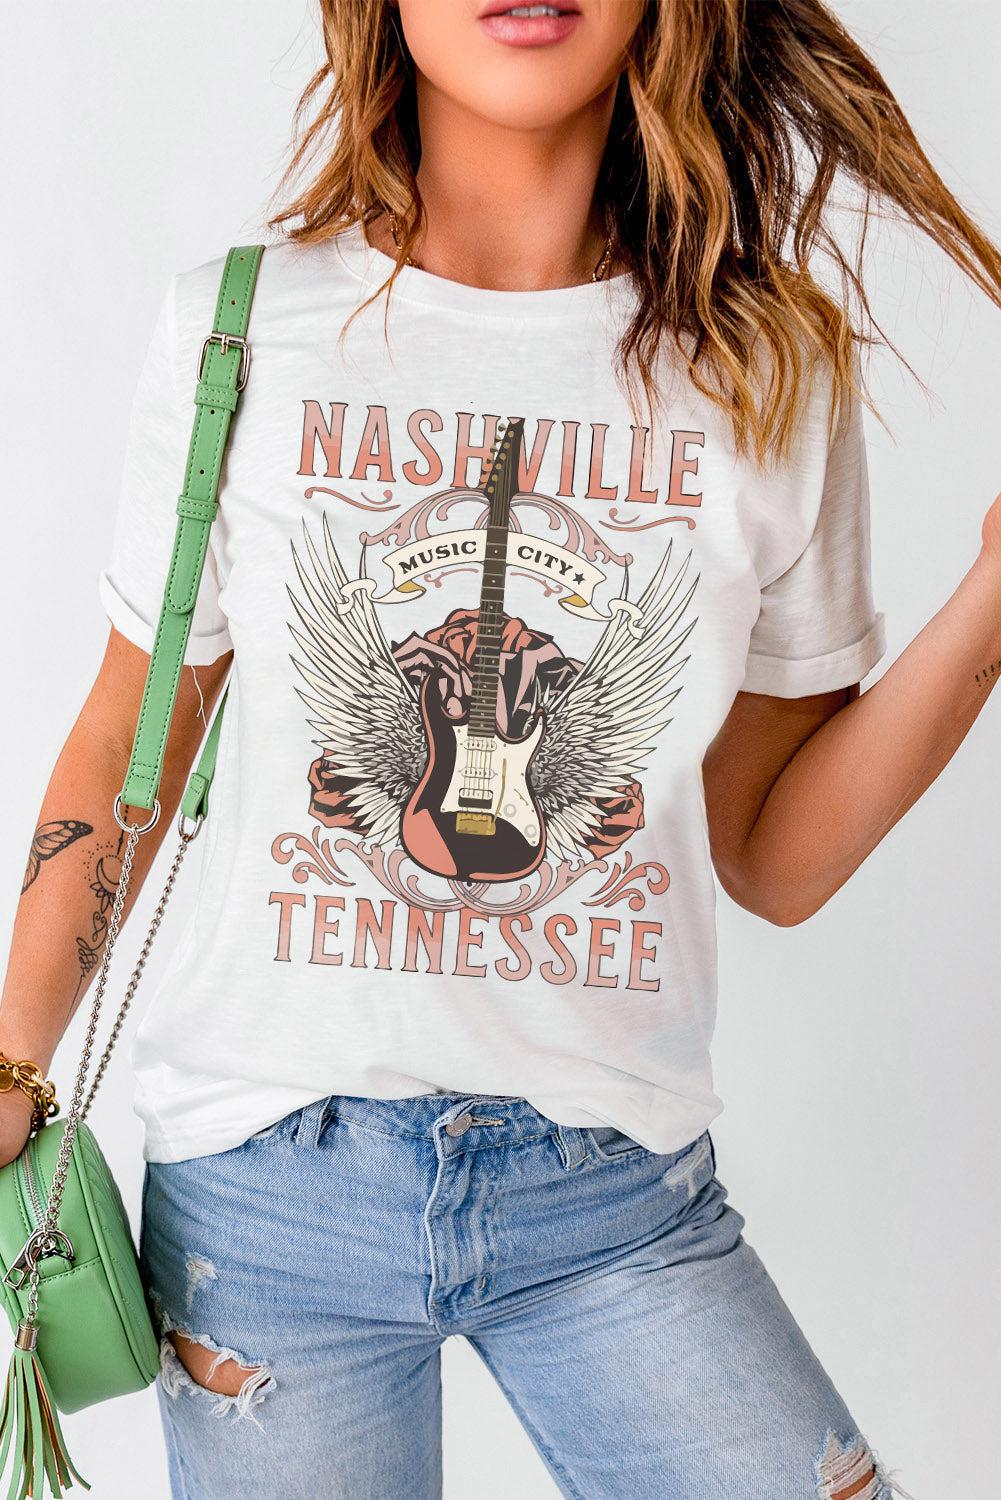 NASHVILLE TENNESSEE Graphic Tee Shirt BLUE ZONE PLANET